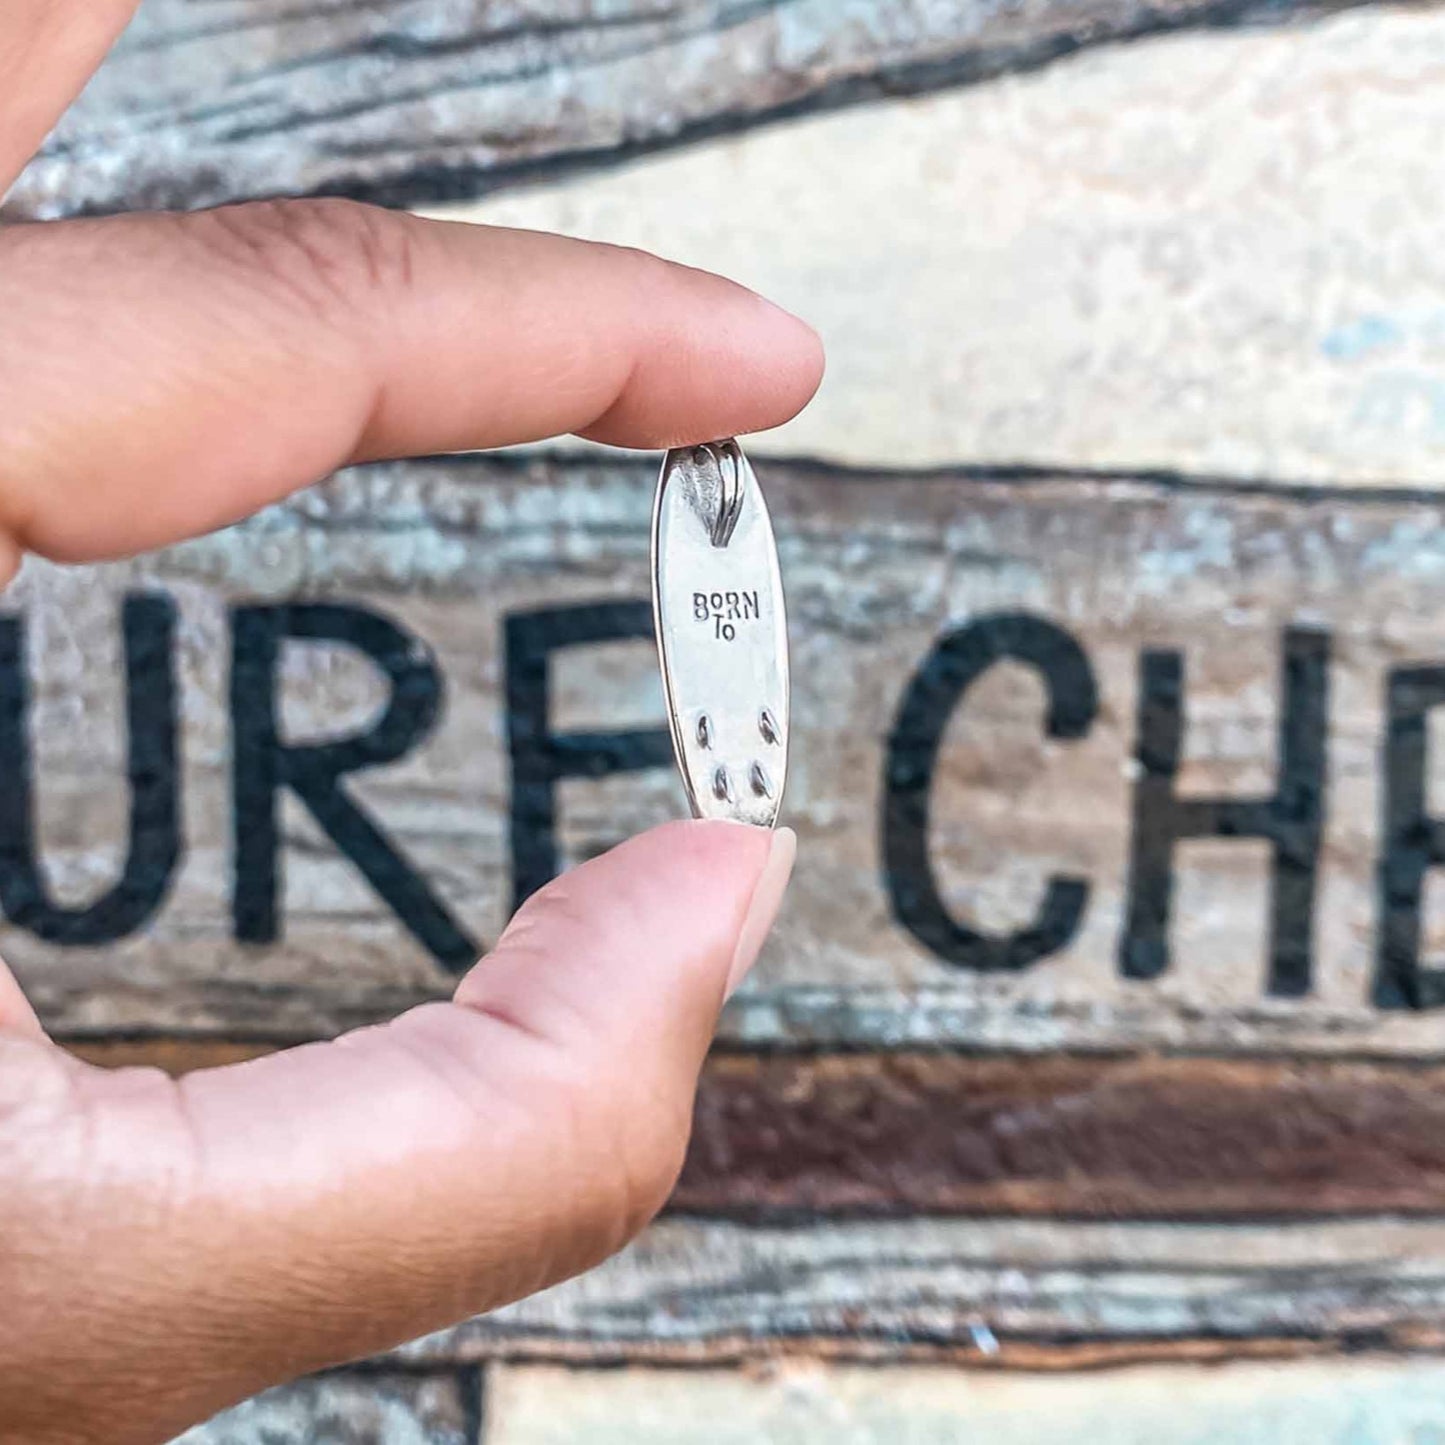 silver surfboard charm necklace. Surf inspired jewelry. Great gift for surfers made by Born to Rock. Designed in San Diego, California